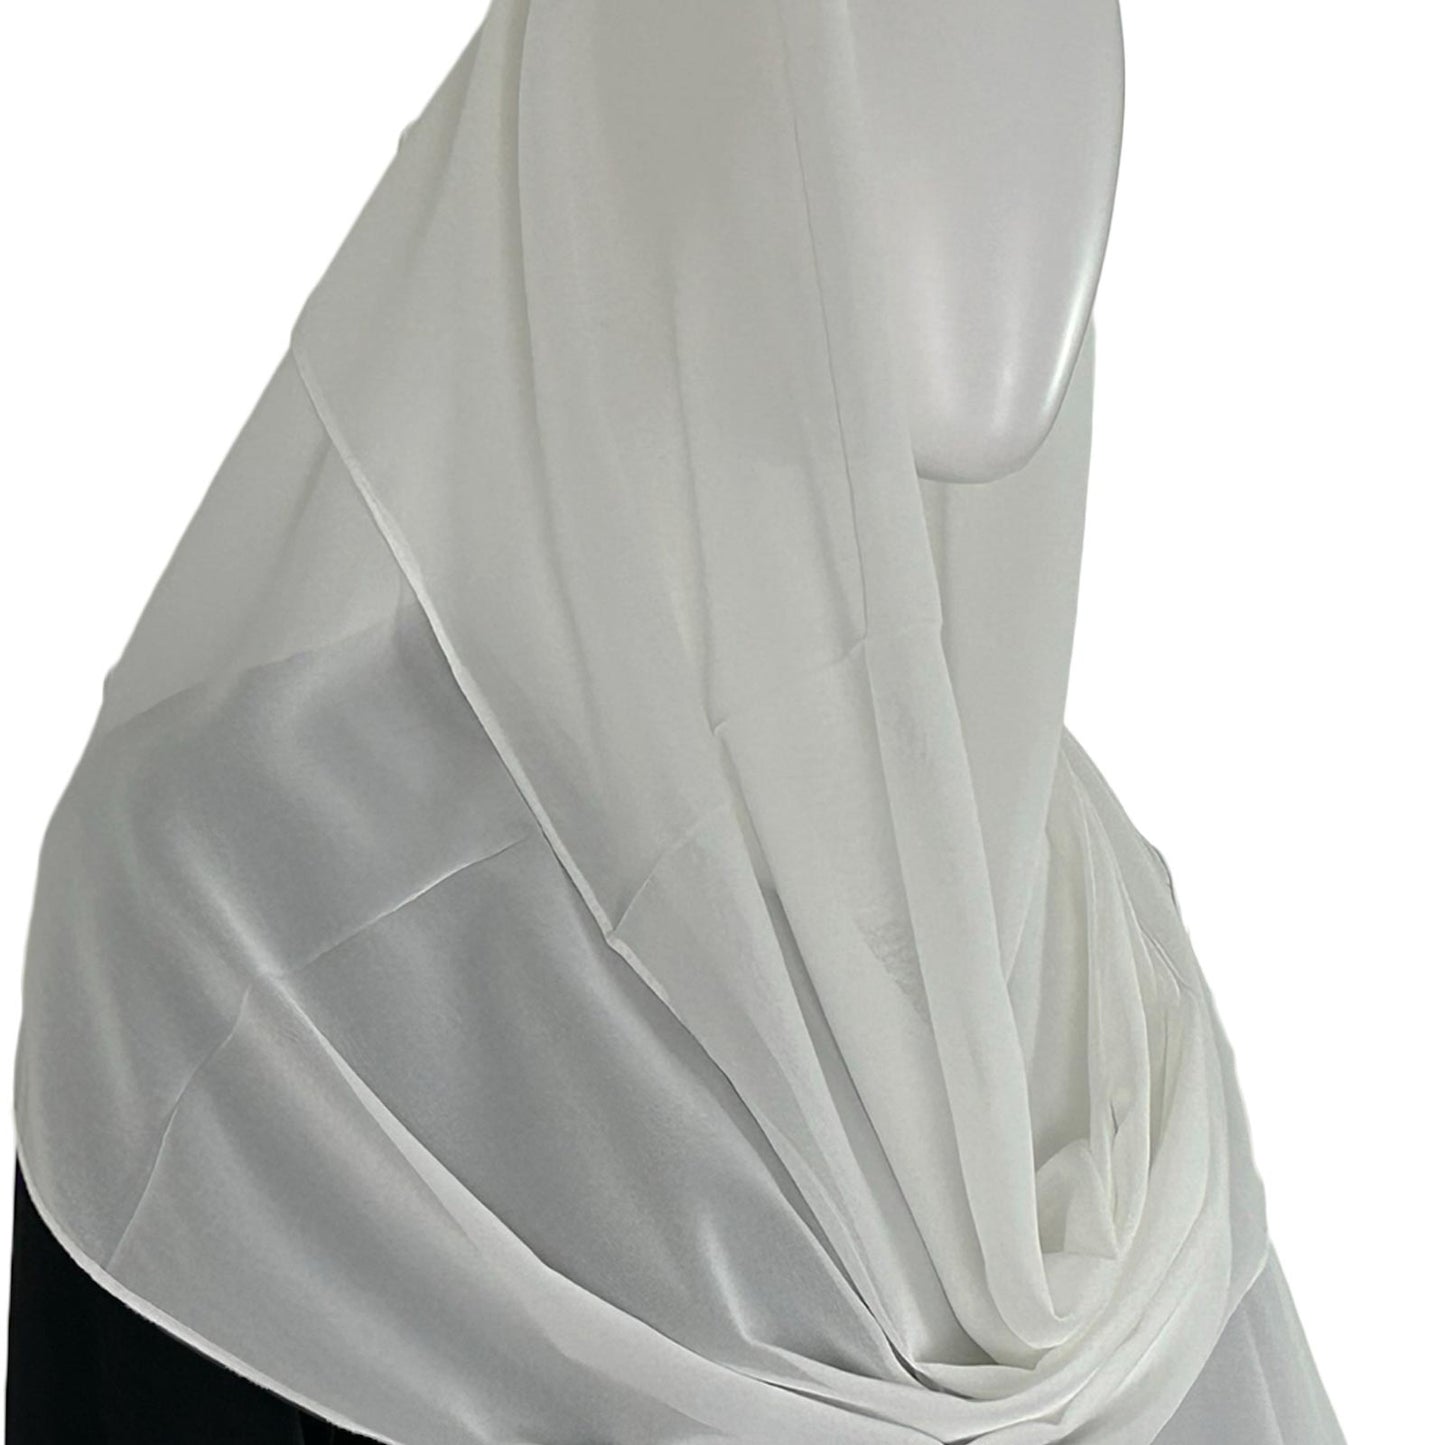 70x27-inch hijab for head neck and front coverage